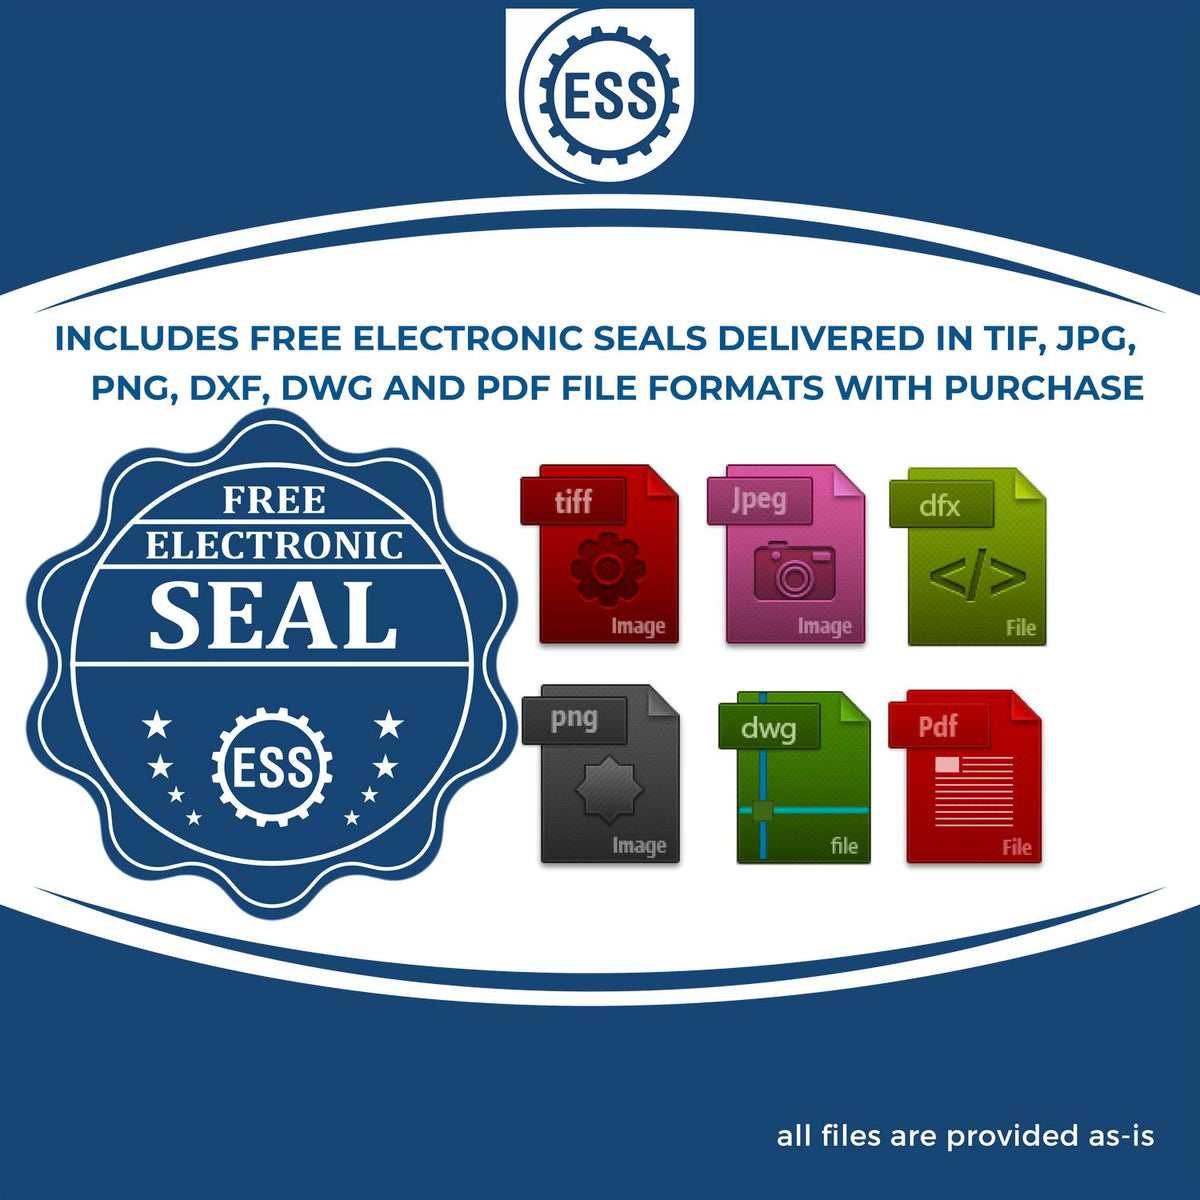 An infographic for the free electronic seal for the Heavy Duty Cast Iron Missouri Geologist Seal Embosser illustrating the different file type icons such as DXF, DWG, TIF, JPG and PNG.